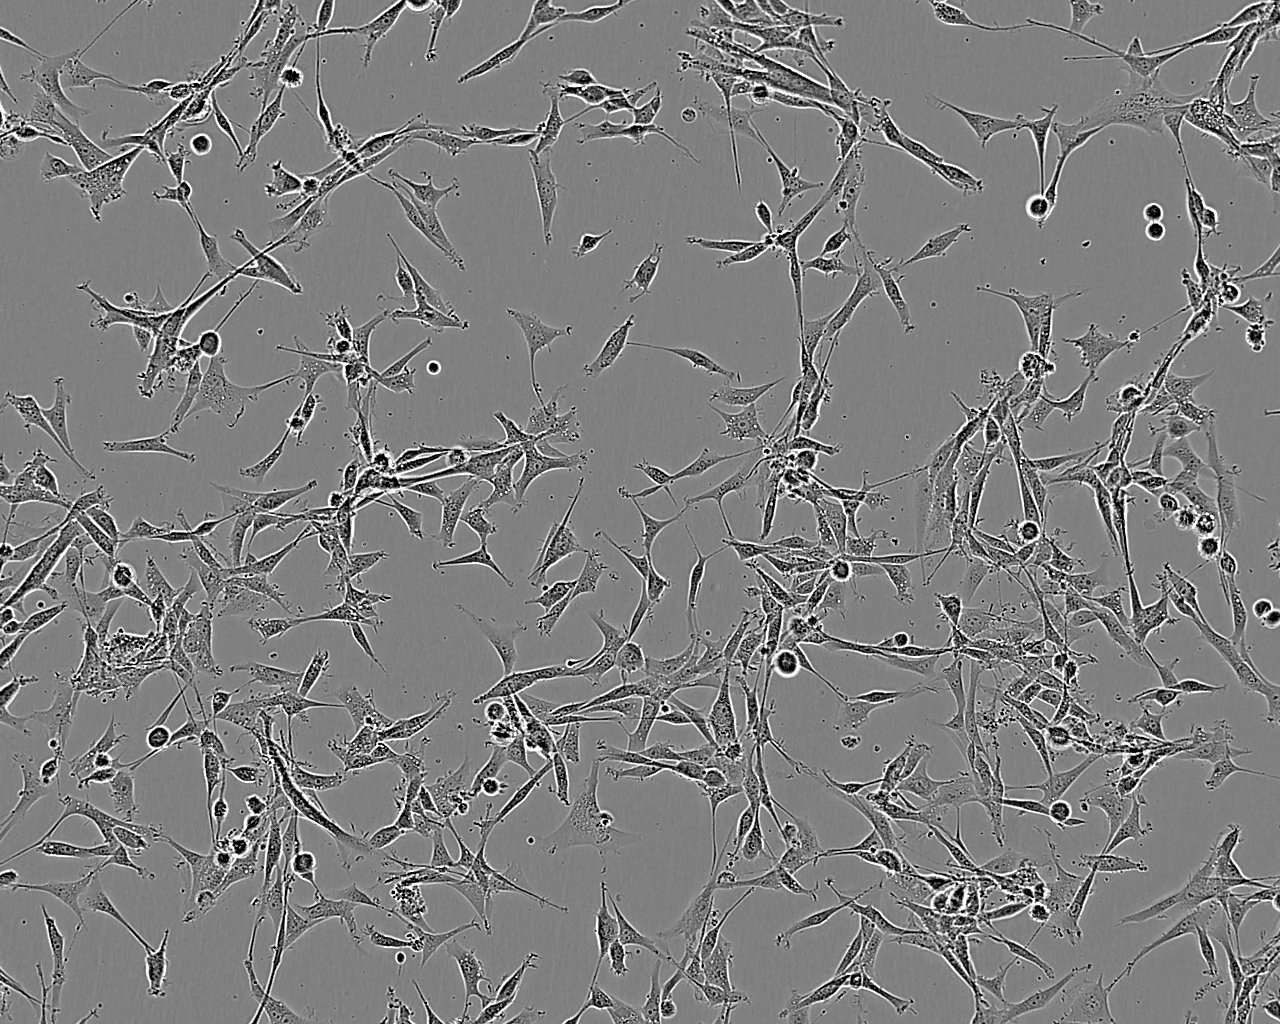 SW948 epithelioid cells人结肠腺癌细胞系,SW948 epithelioid cells